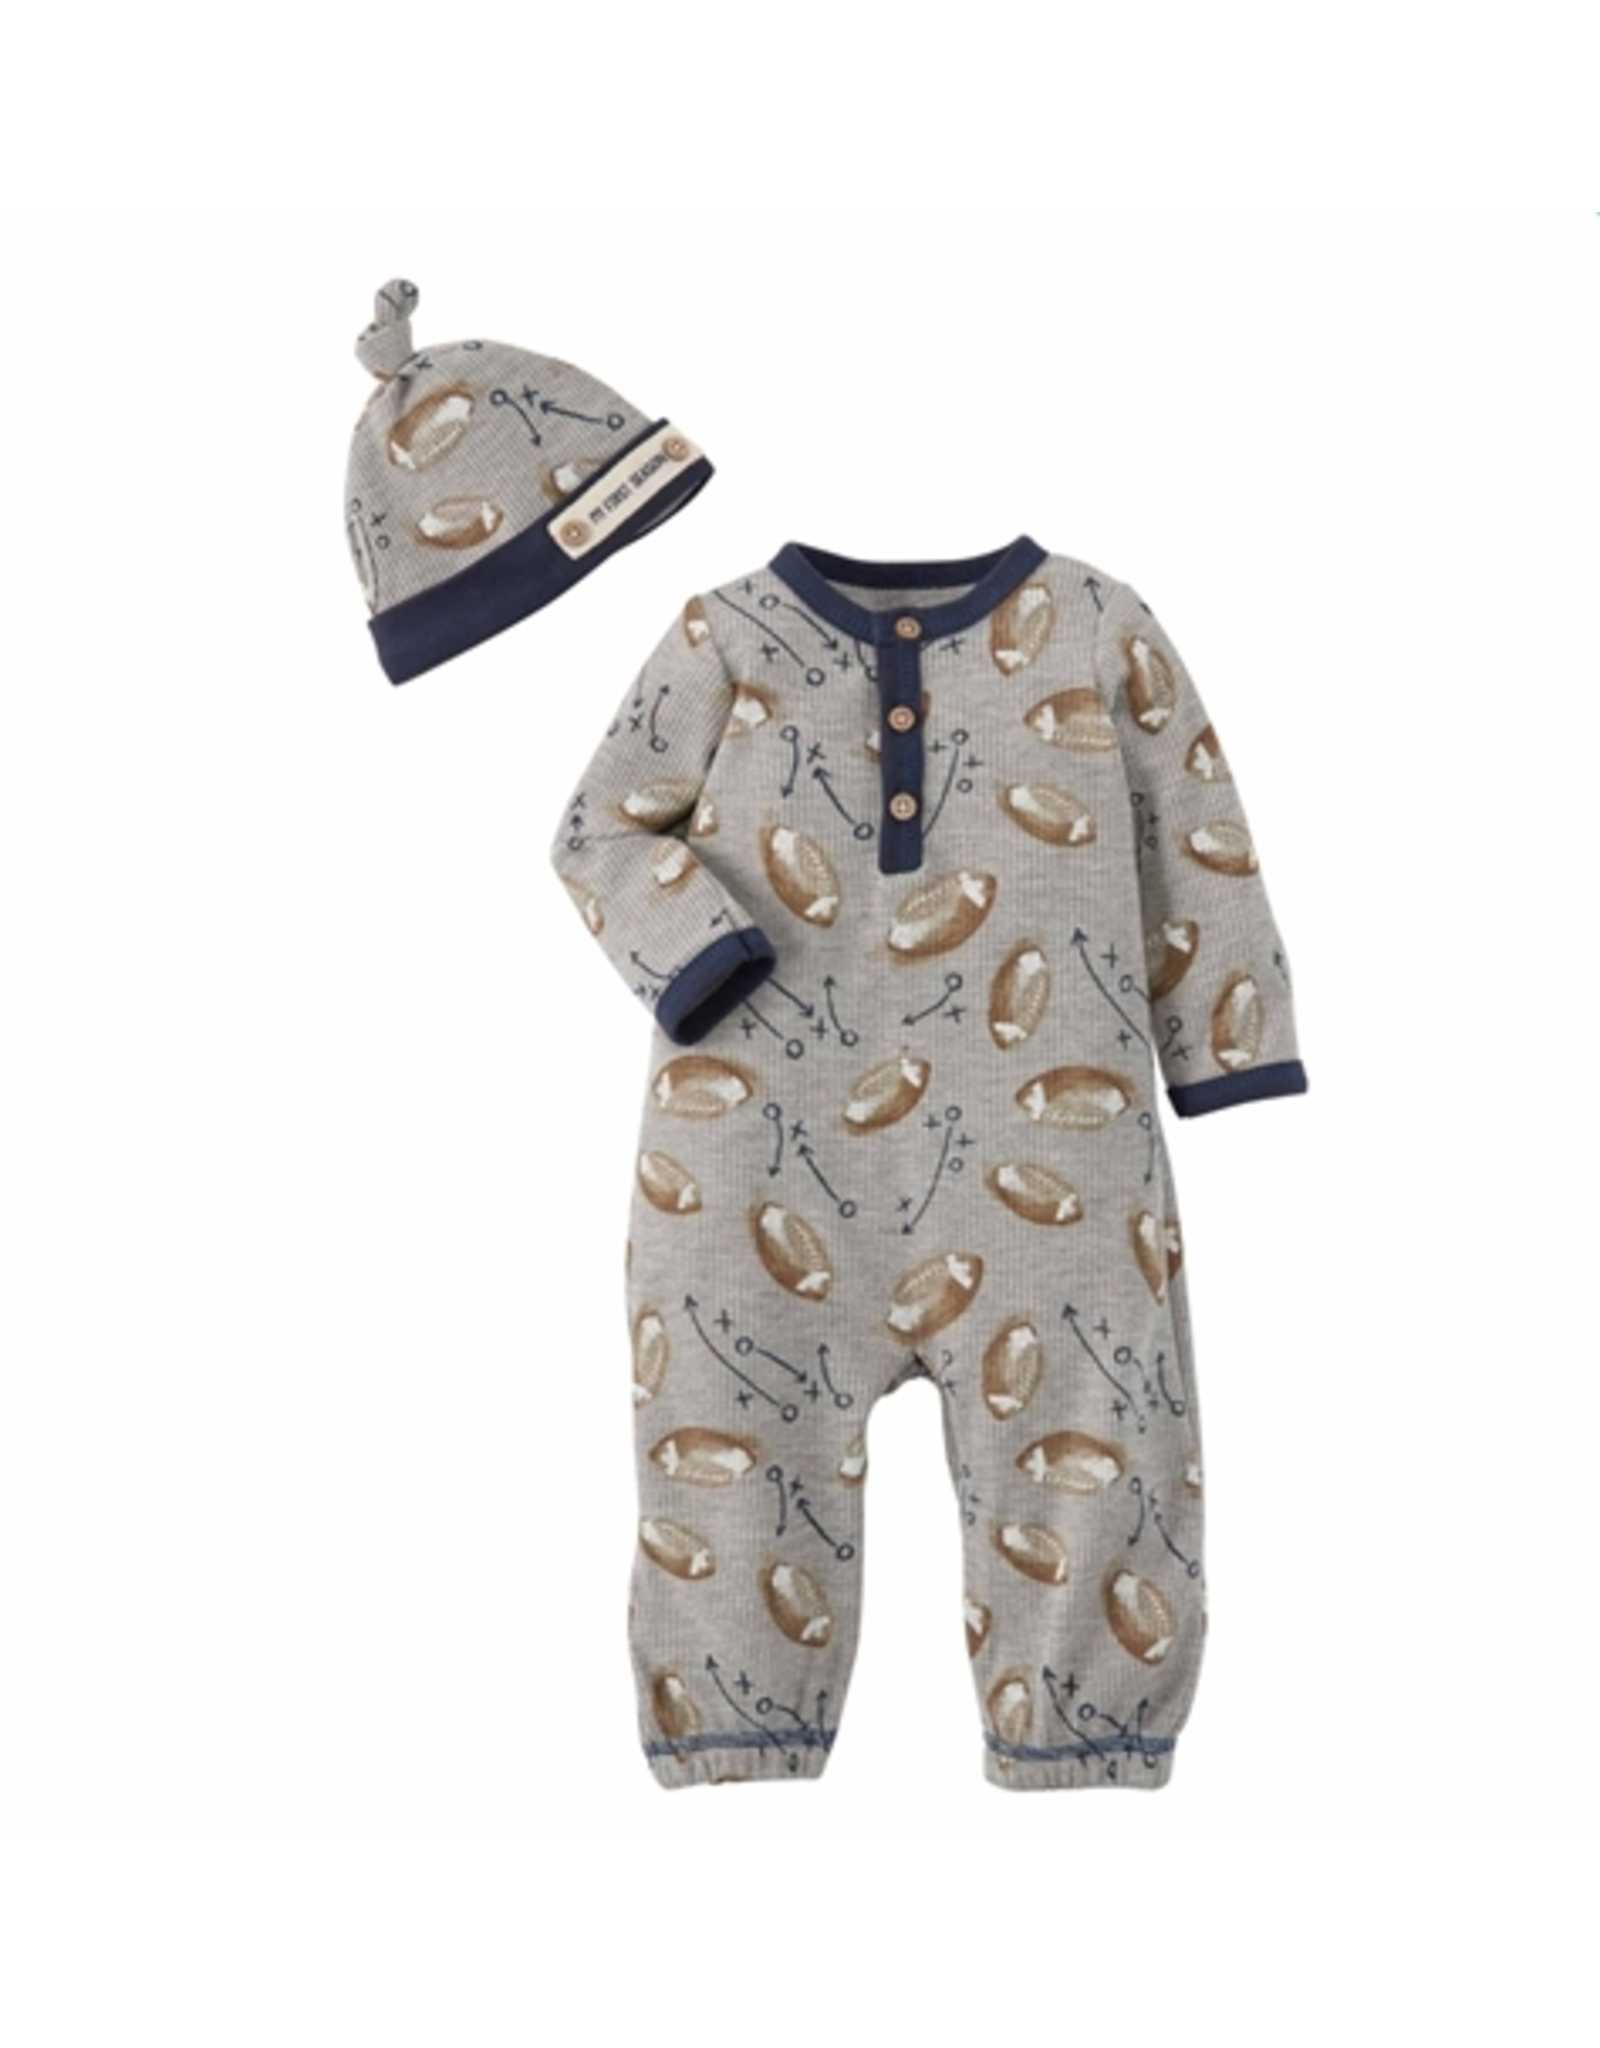 Mud Pie Football Take Me Home Outfit, 0-3 months